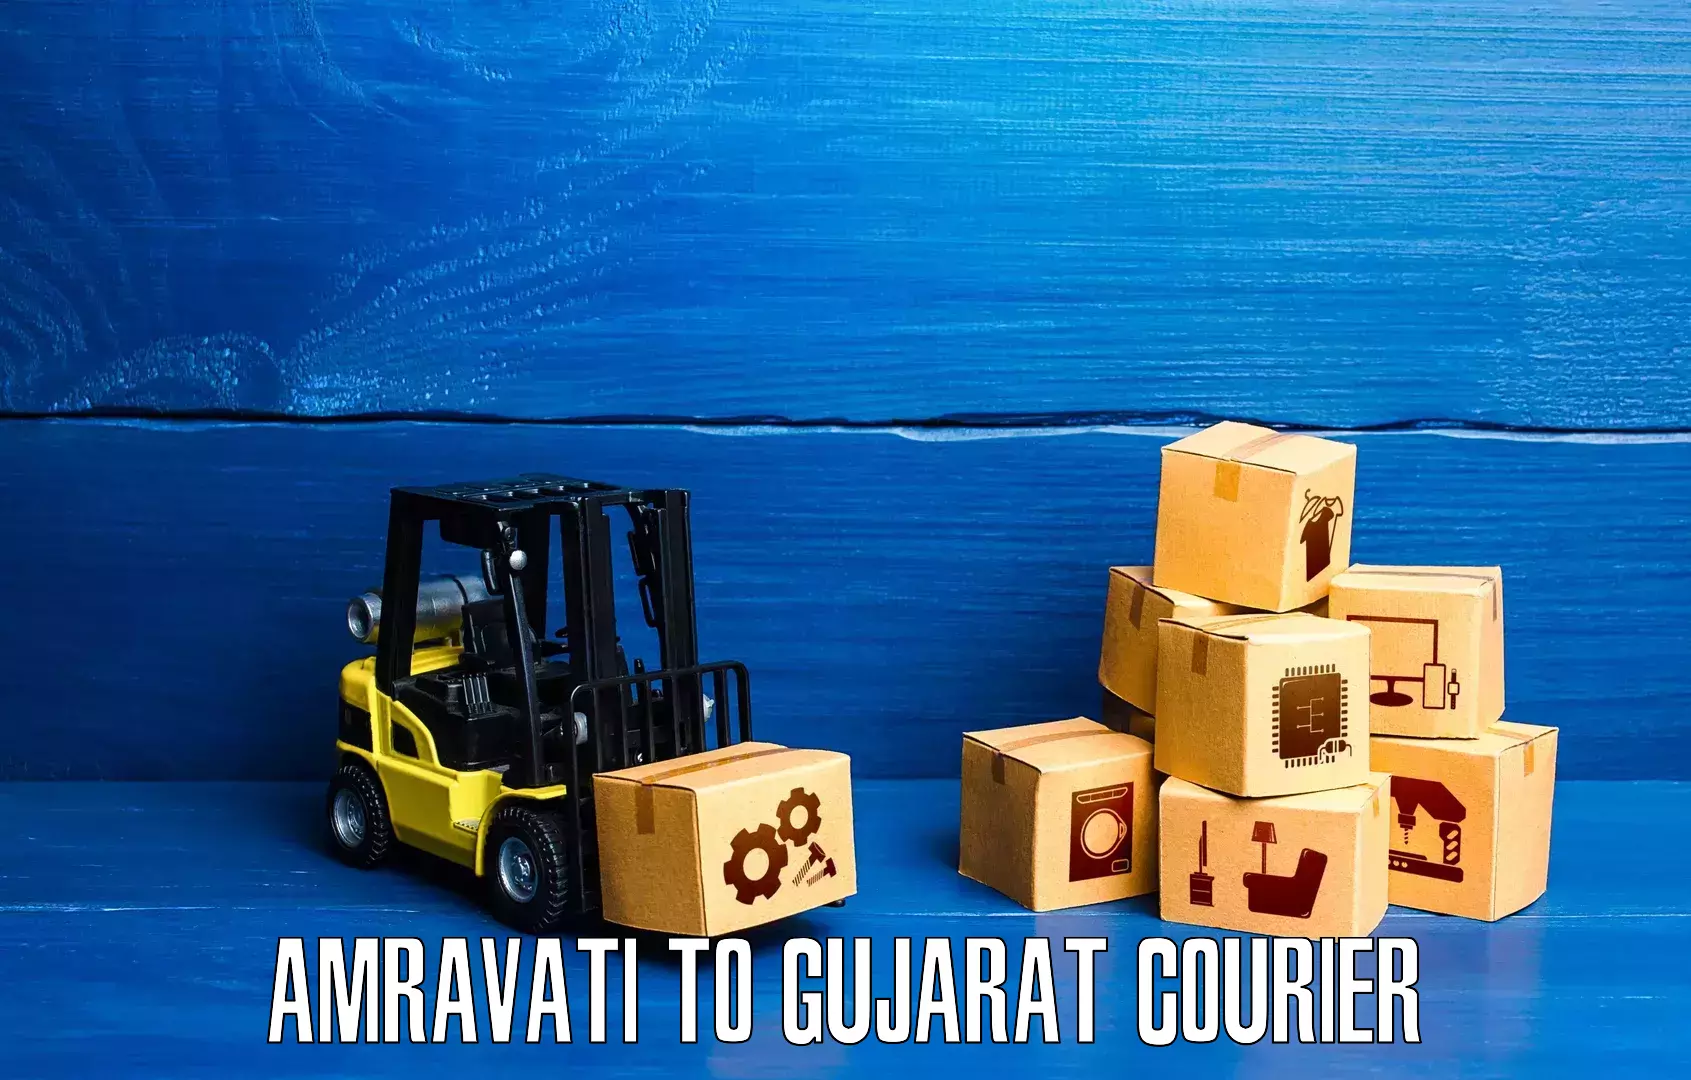 On-call courier service Amravati to Anand Agricultural University